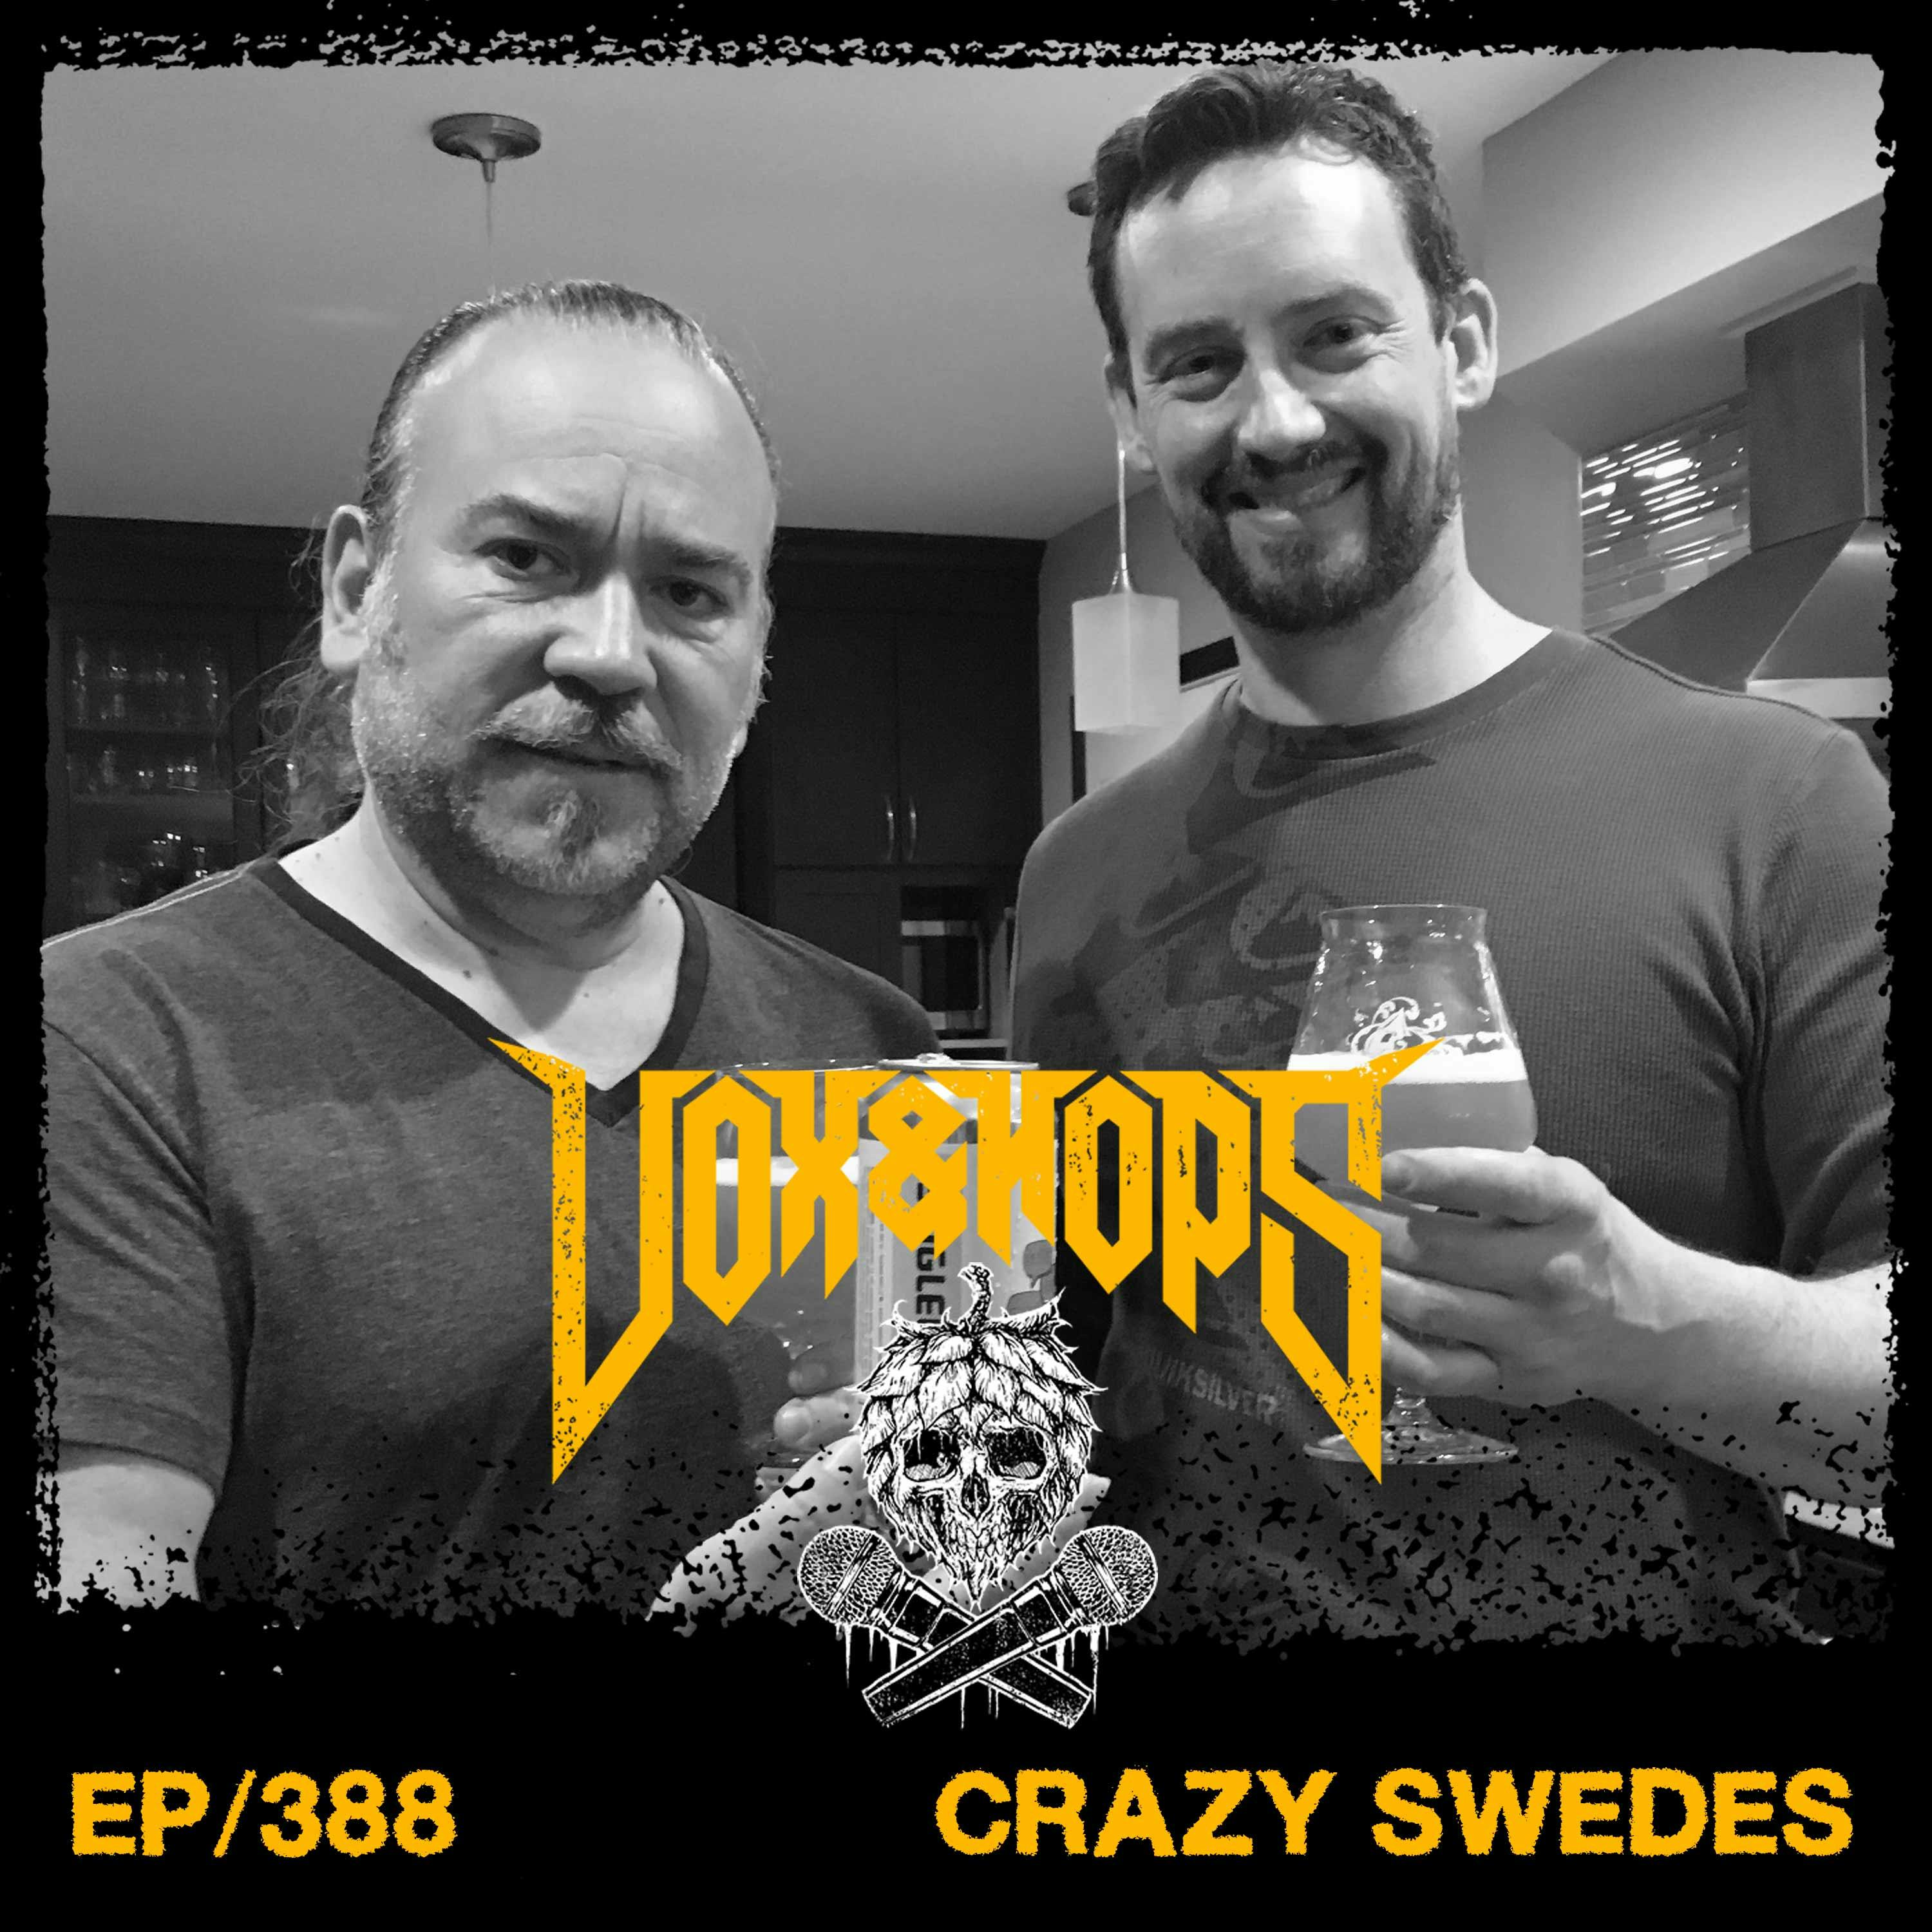 Improvising with Will Severin and Rob Lindquist of Crazy Swedes